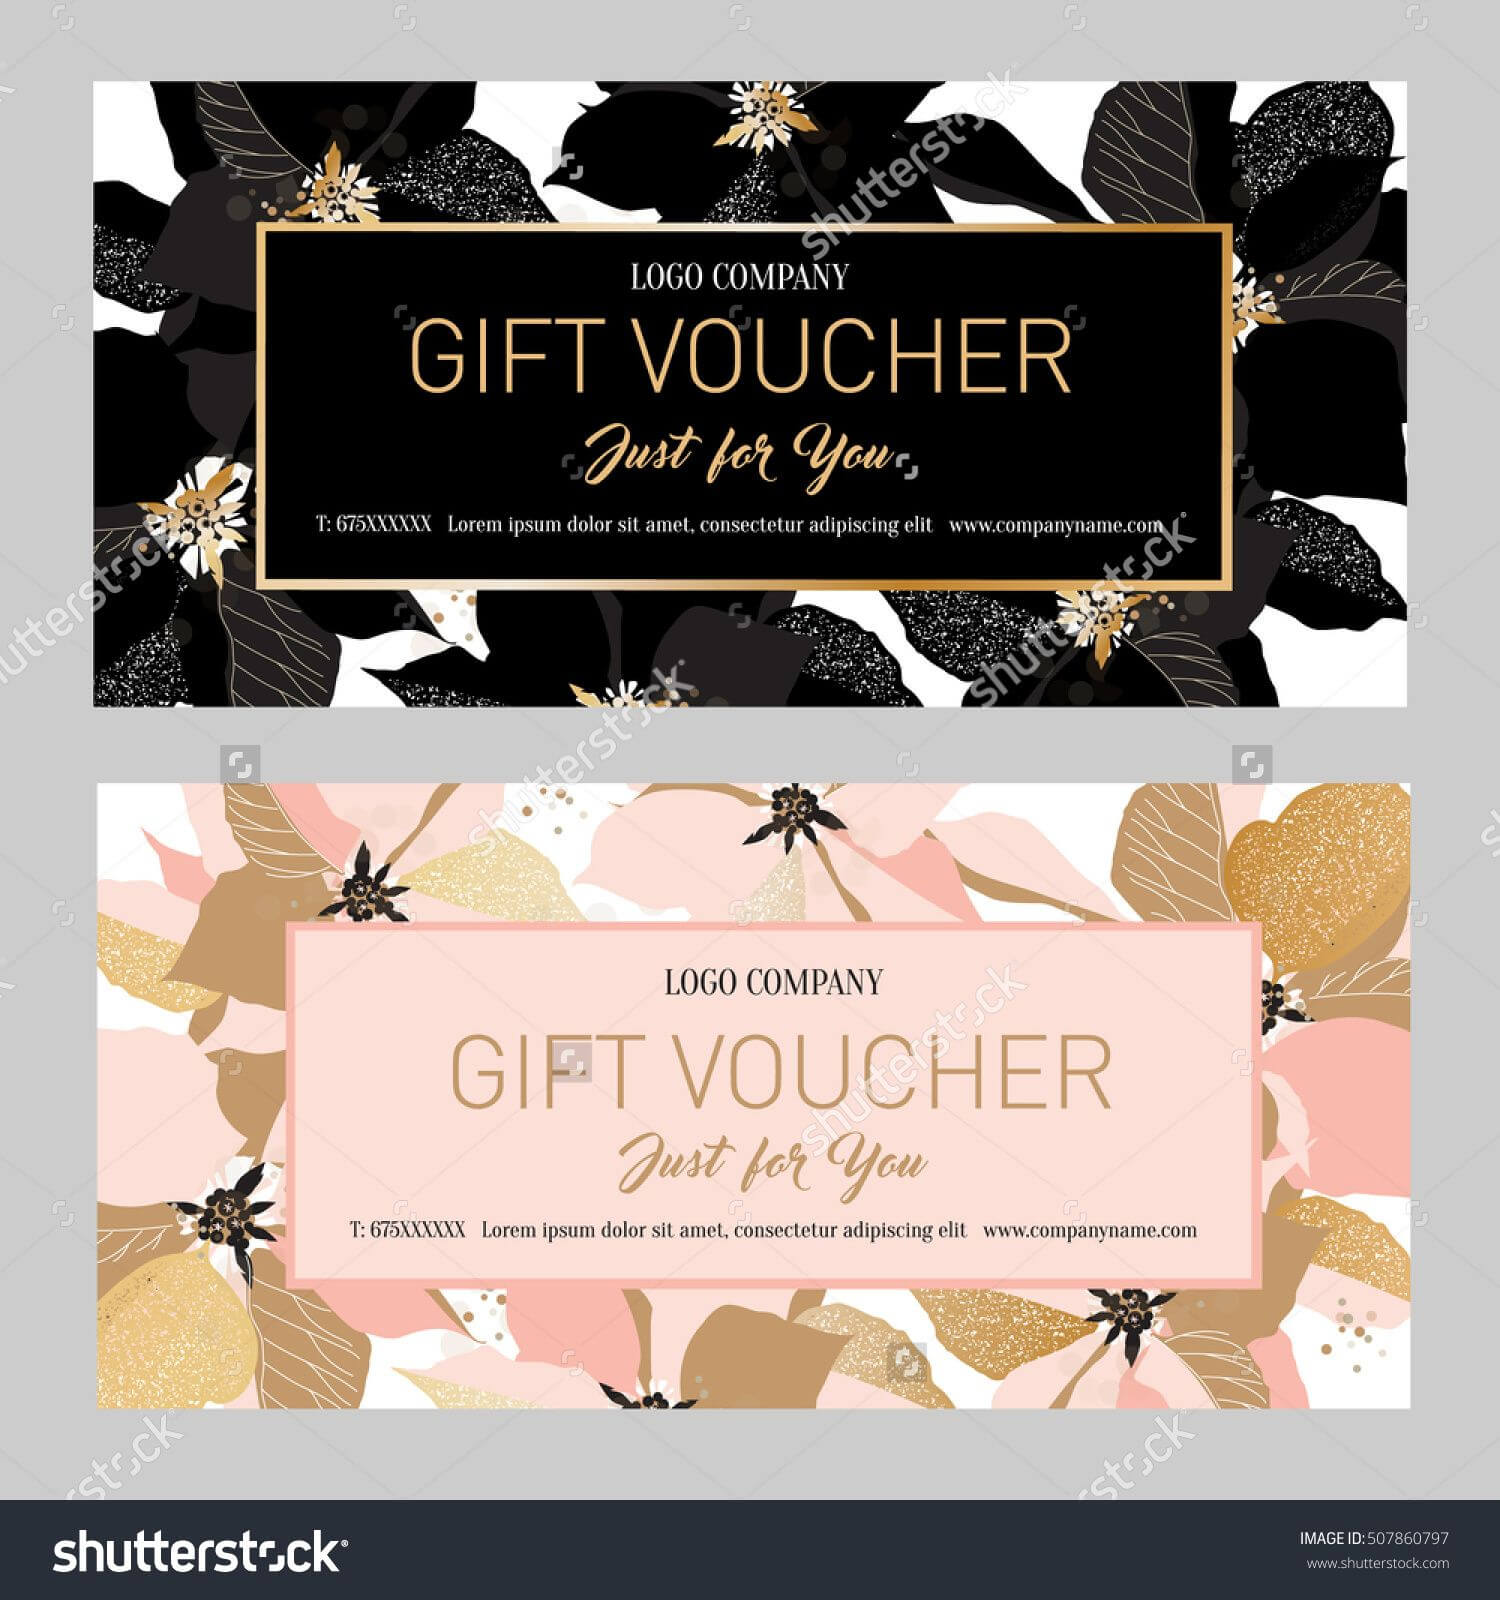 Gift Premium Certificate. Gift Card. Gift Voucher. Coupon Intended For Salon Gift Certificate Template